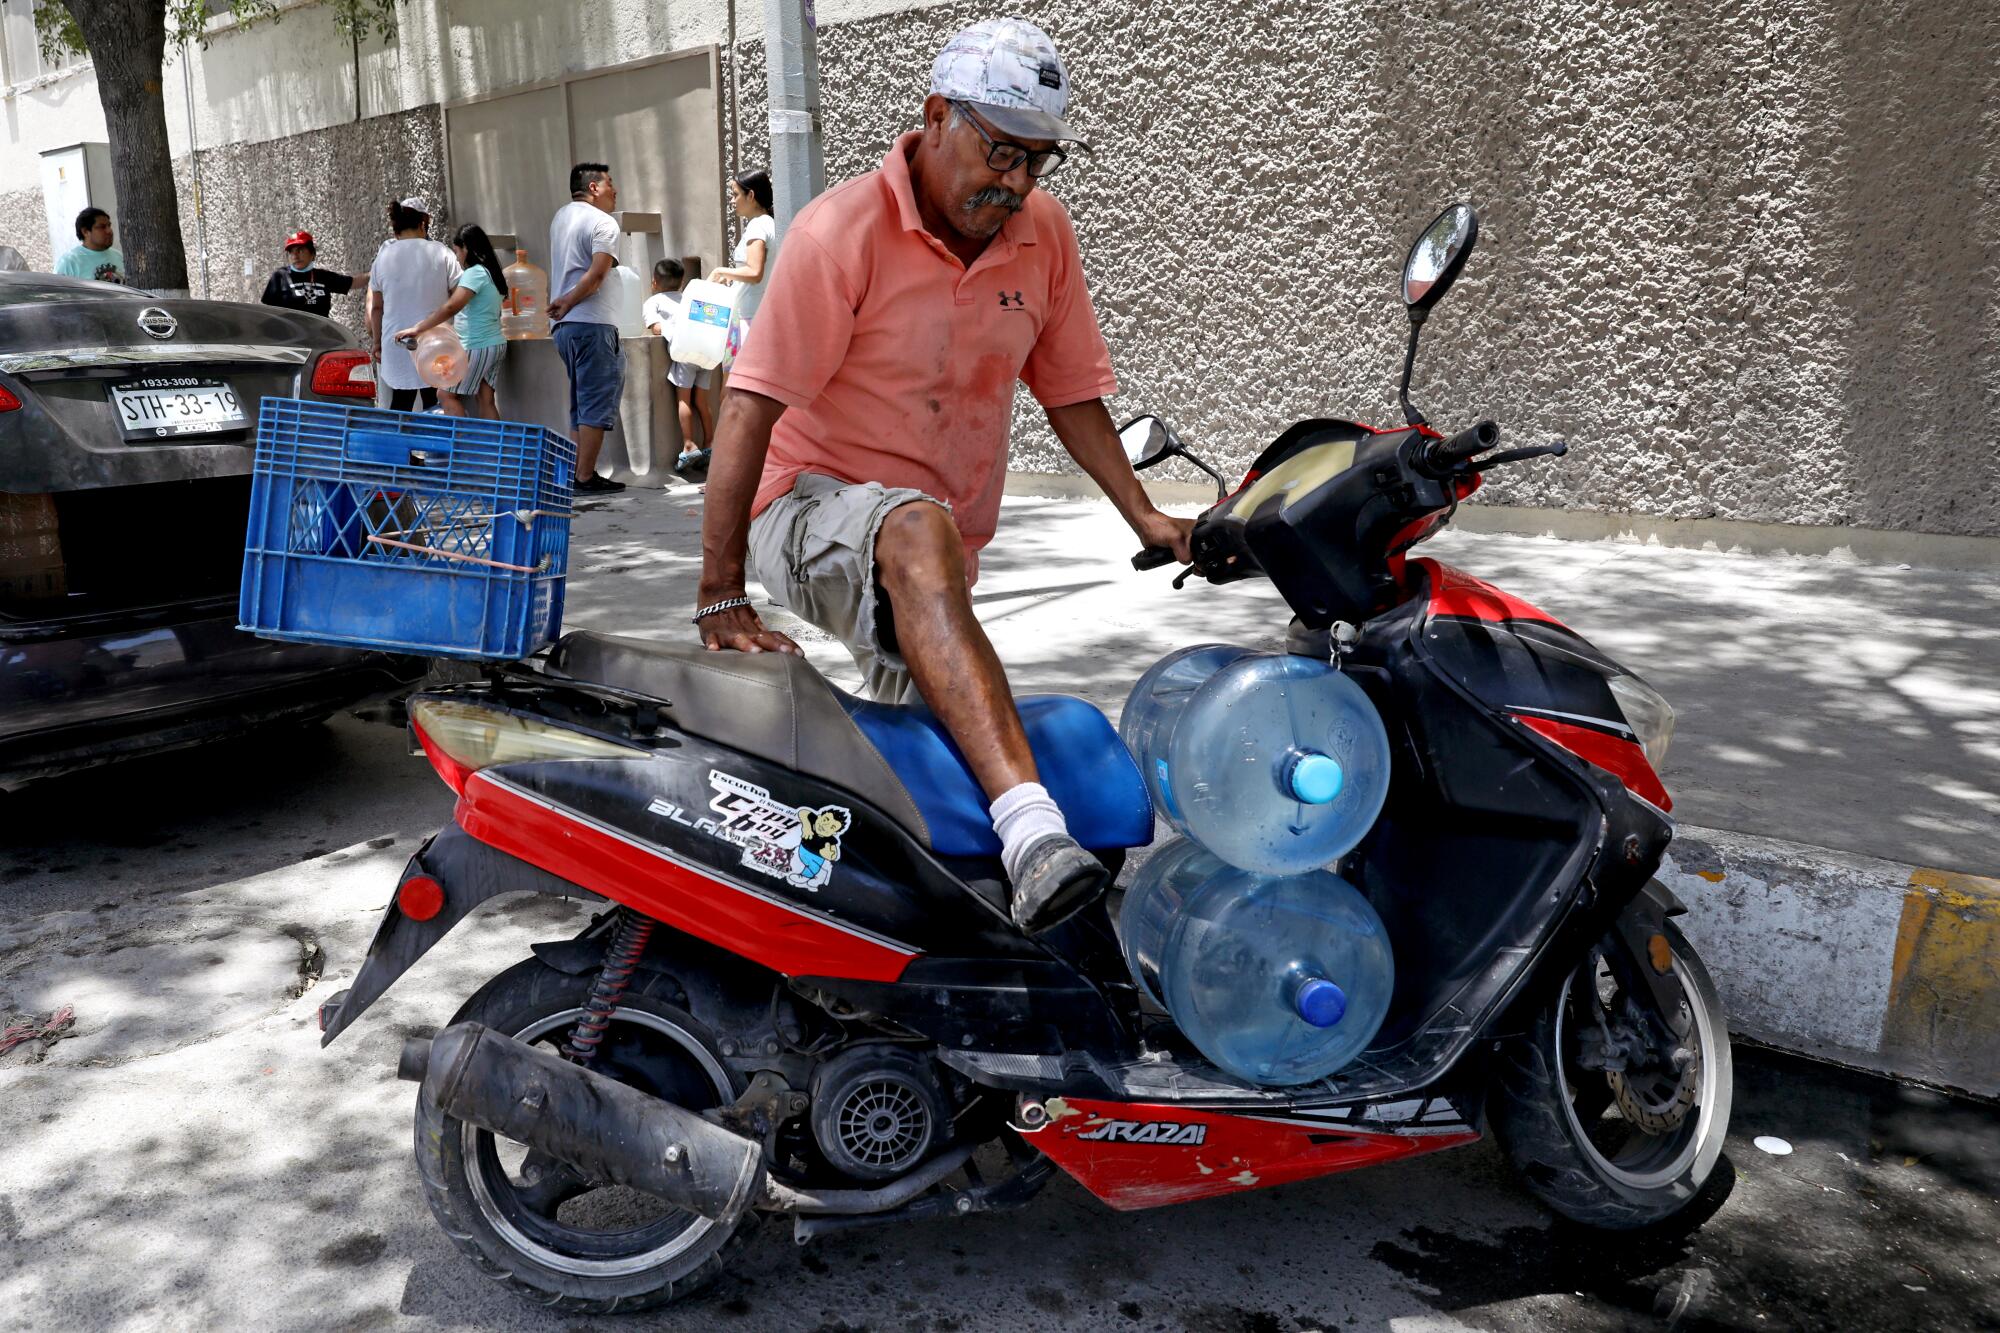 A man with large water bottles on a parked motorcycle